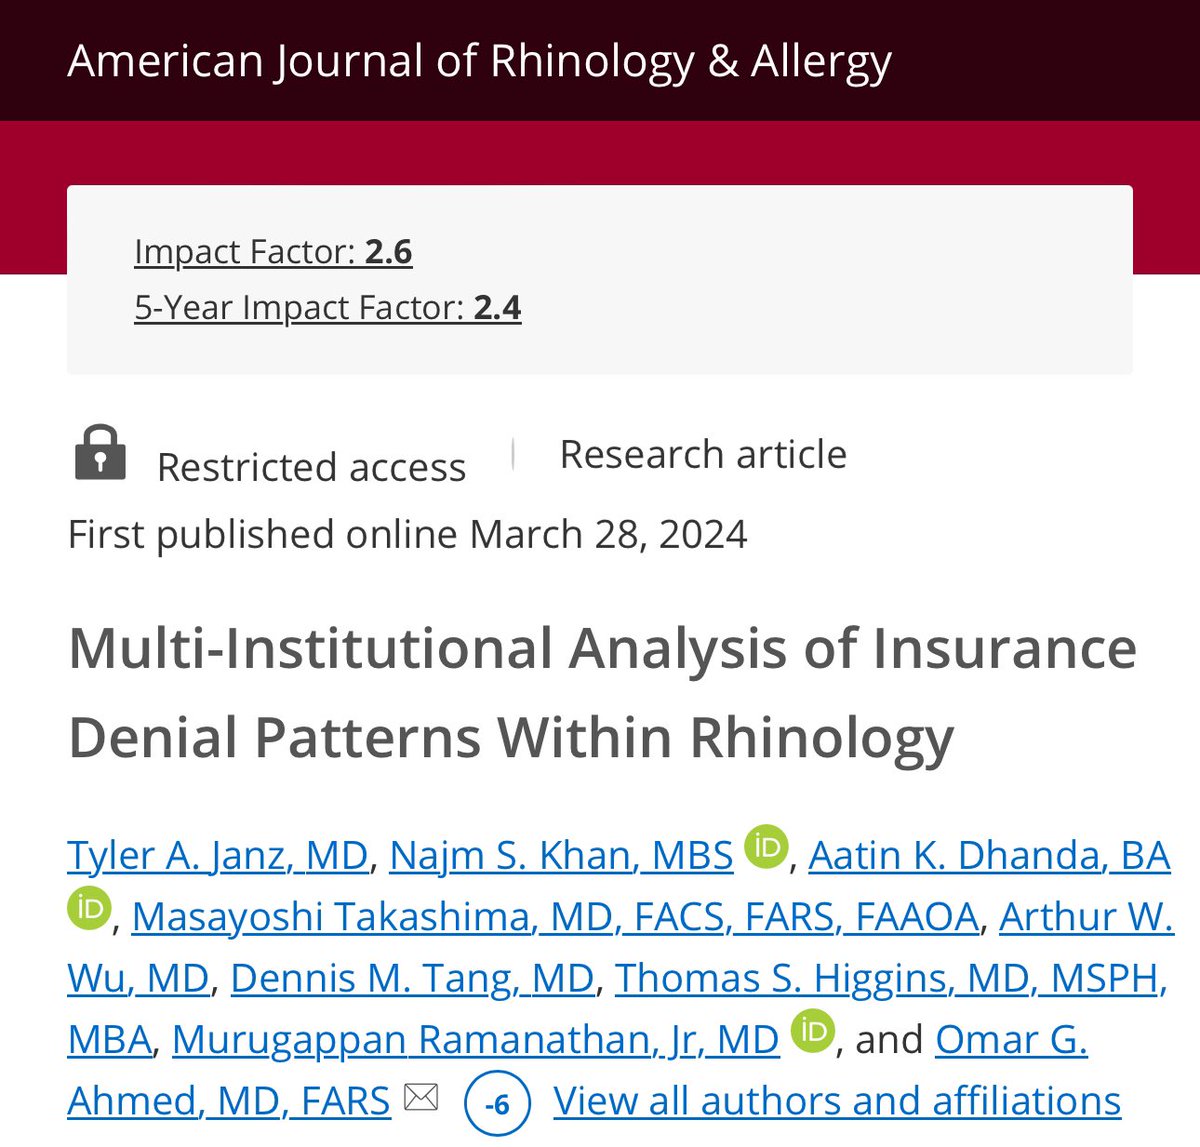 New multi institutional research looking at trends of insurance denials in the field of Rhinology.  Appreciate our colleagues from Johns Hopkins, Cedars Sinai and UTMB! 

journals.sagepub.com/doi/10.1177/19…